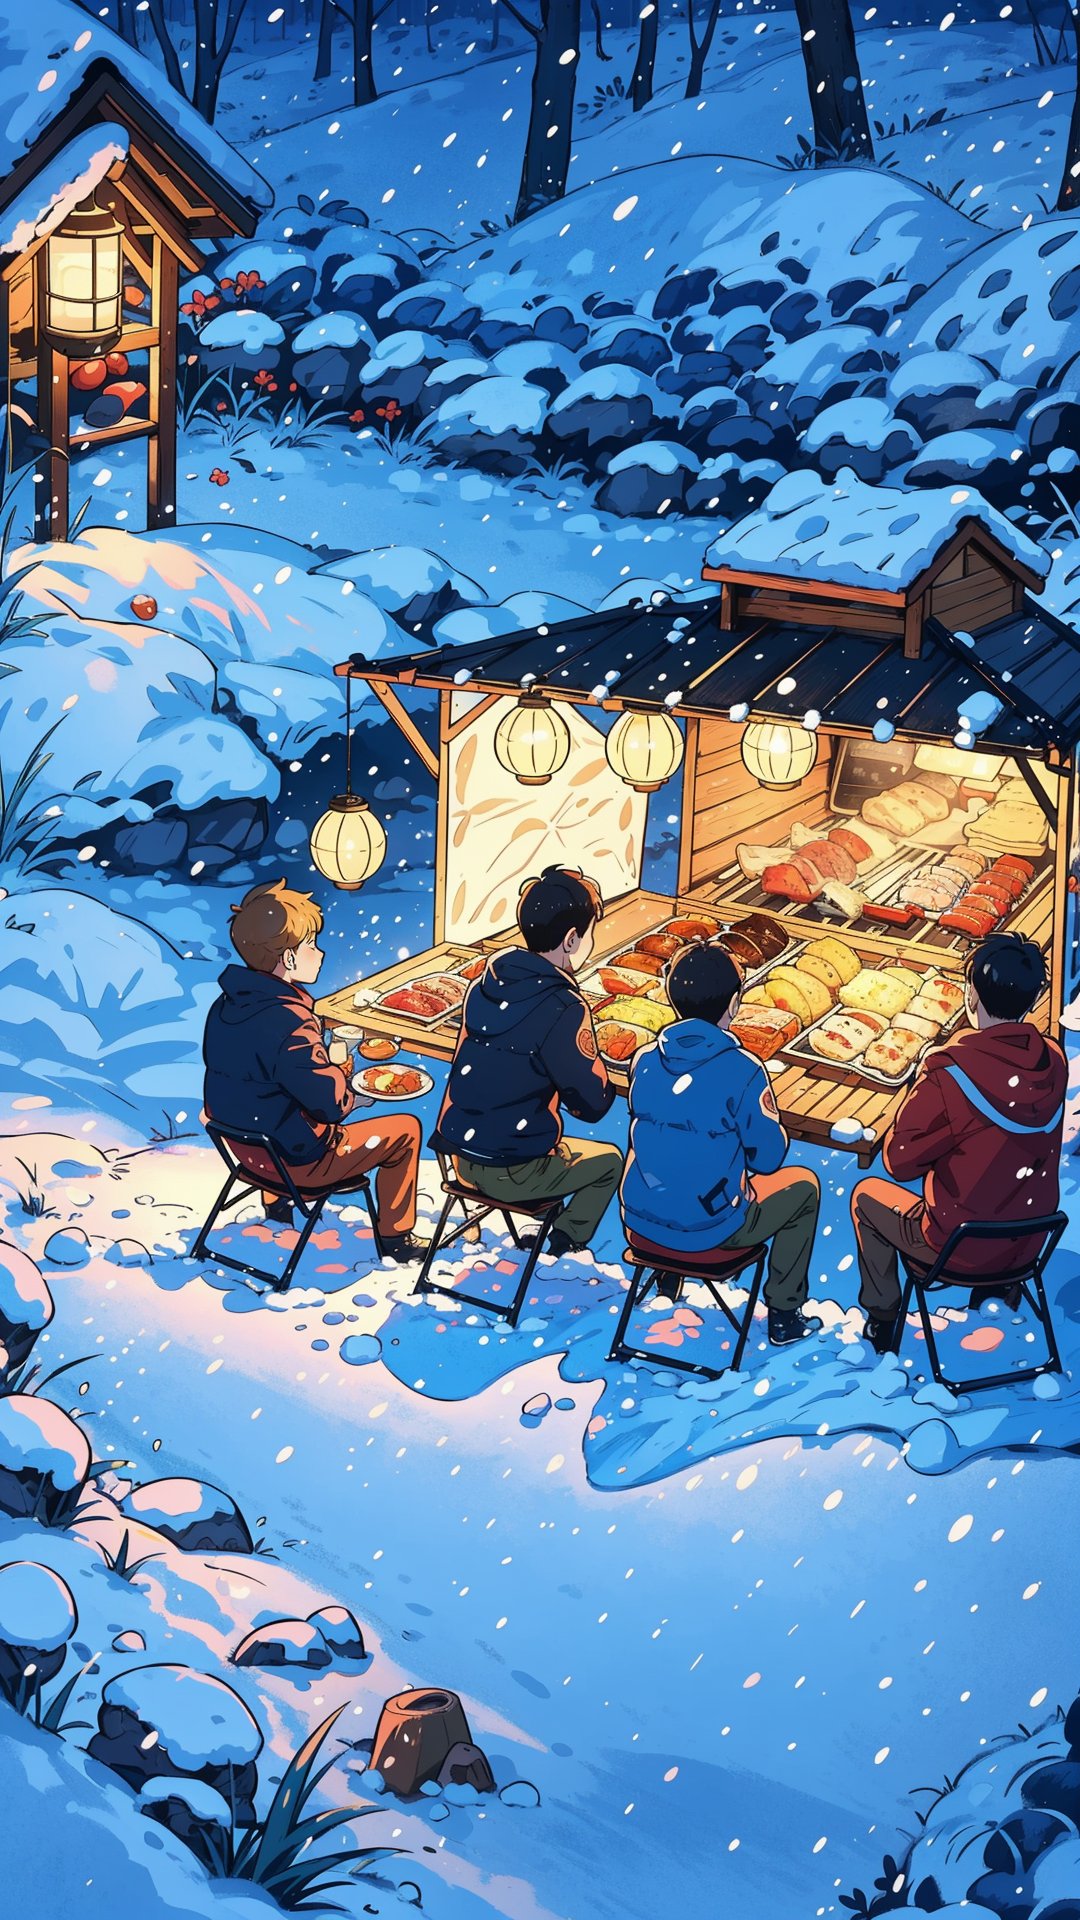 (5 boys watching and playing with each other), whole body (Laurie: 1.2), camping, picnicking, barbecue, barbecue, winter, snow, night, children's illustrations, masterpiece, best quality,